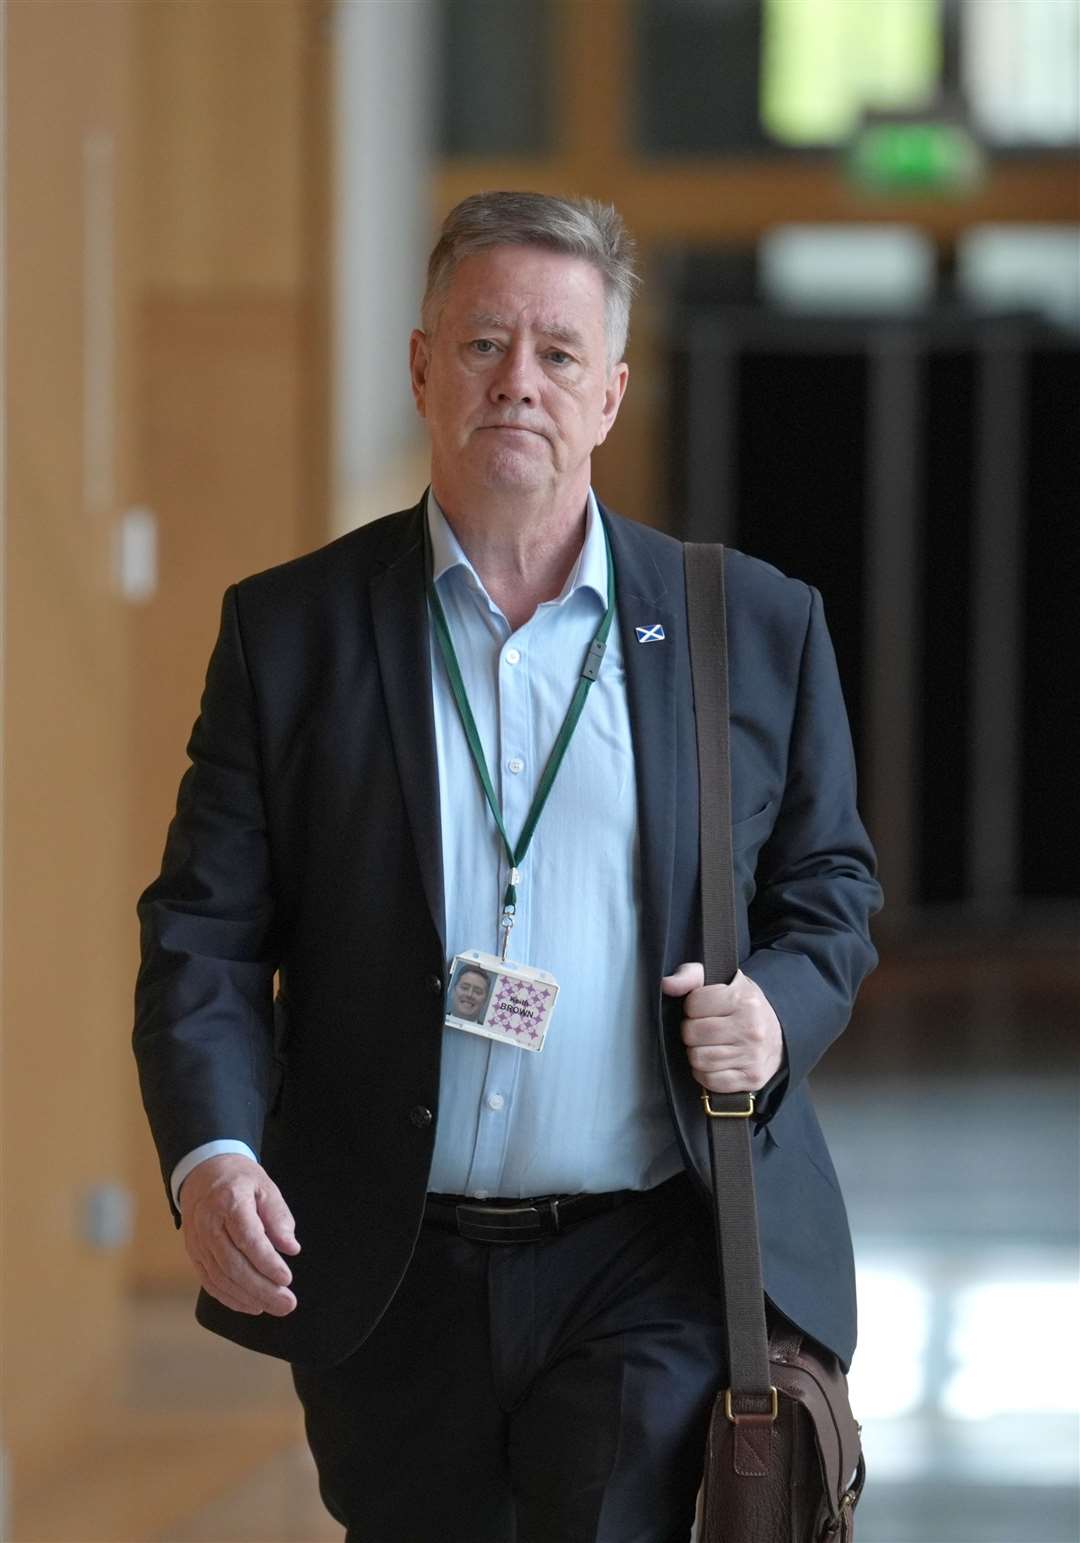 Keith Brown said Mr Swinney would scare their pro-Union opponents (Andrew Milligan/PA)